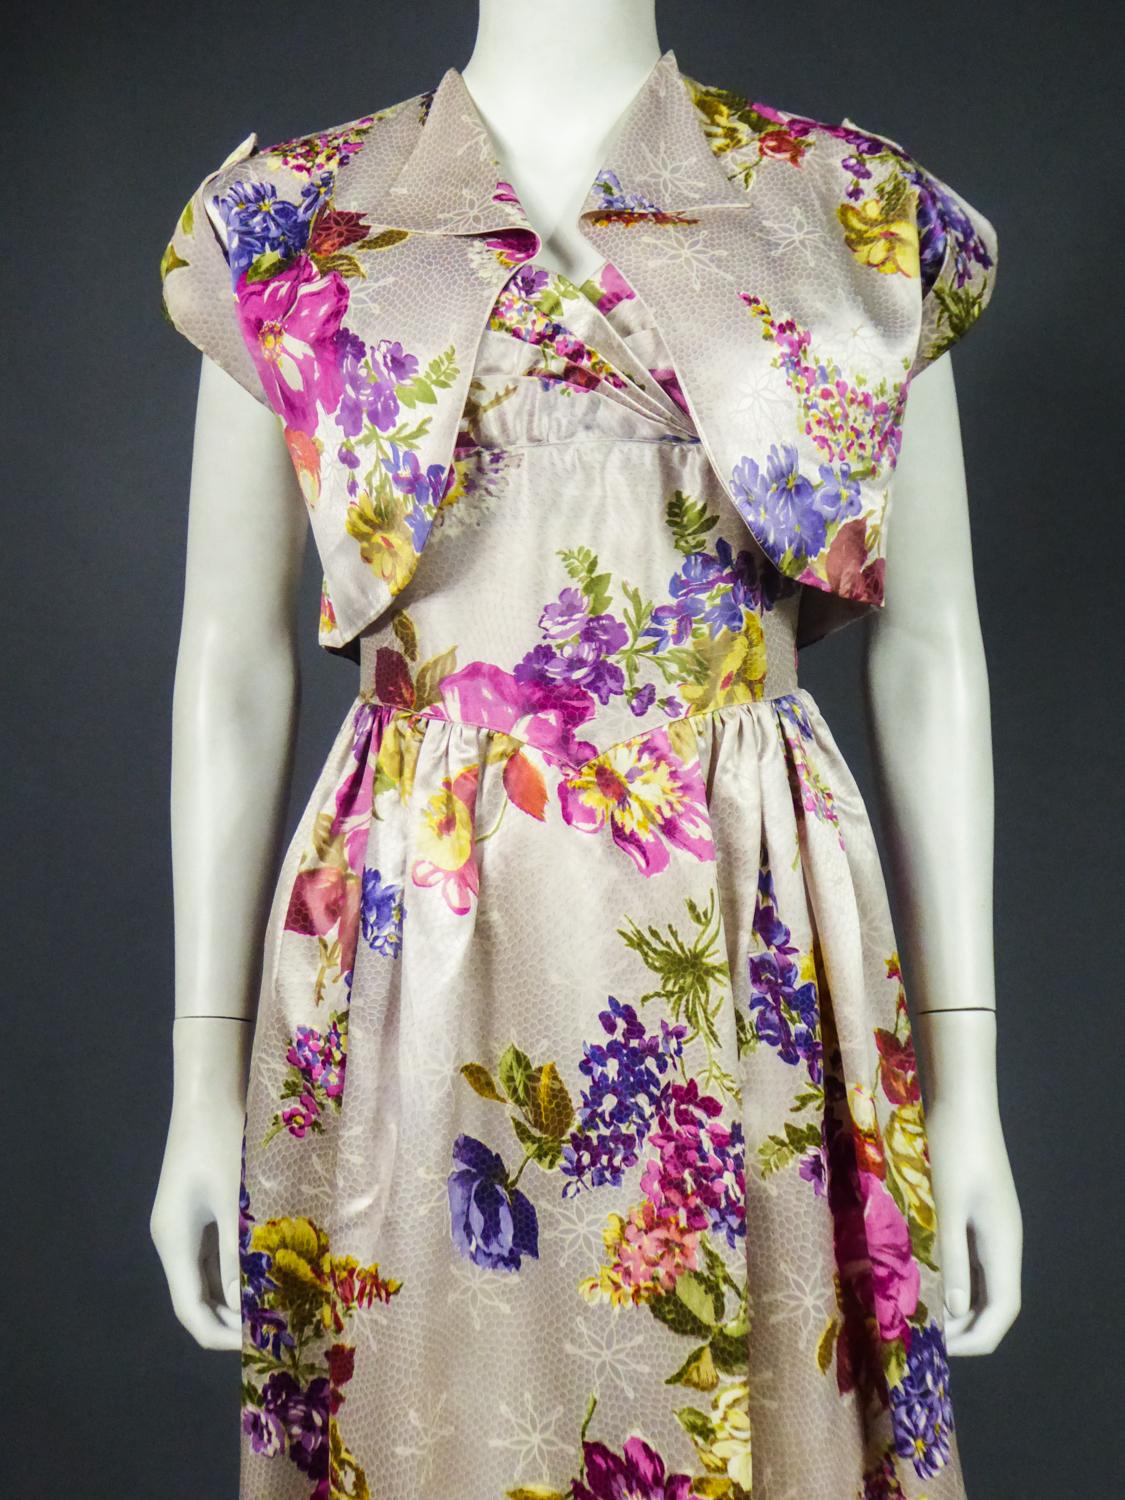 Circa 1965-1970
France

Dress and bolero in waxed printed silk satin from the 1960s with no label. Long dress with finely pleated skirt at the waist ending in a point on the front. Fitted bustier with small straps and concentric pleated work